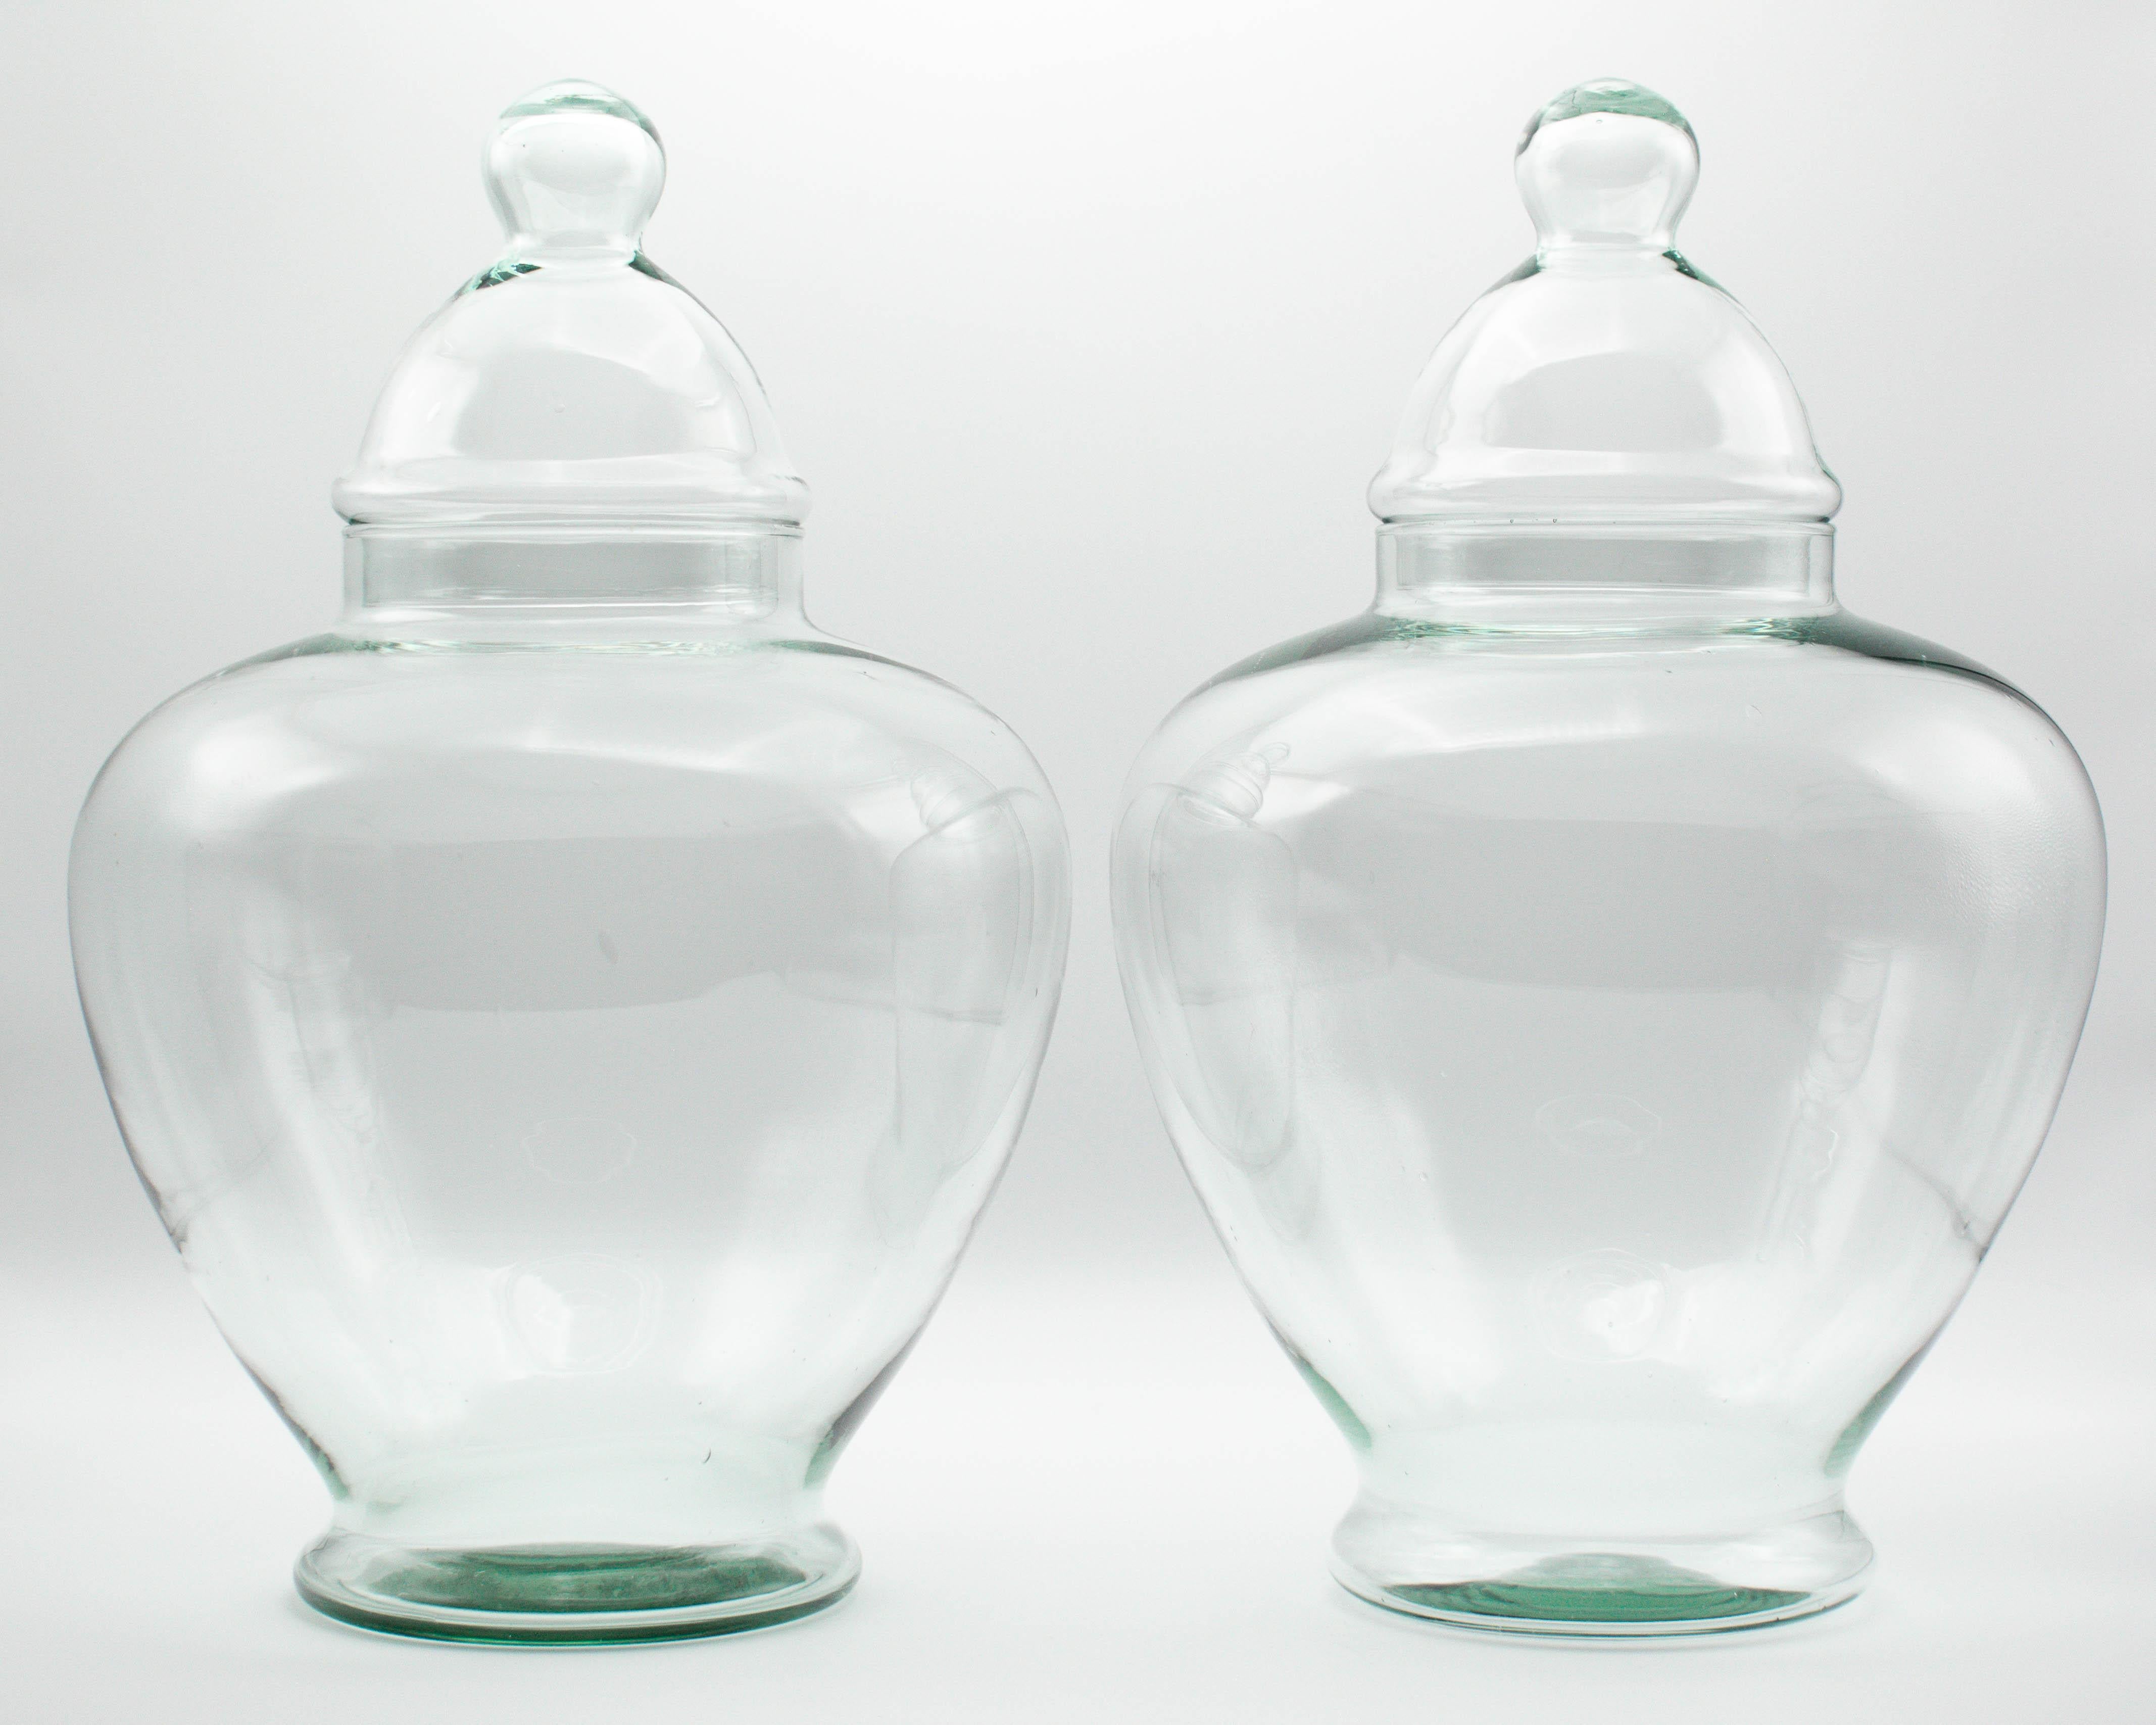 A pair of French blown glass lidded apothecary or candy jars. Smooth urn shaped form with domed lids. Large and light weight, perfect for jelly beans or macerated fruit. Purchased from a confiserie, or sweet shop, along with many glass jars of